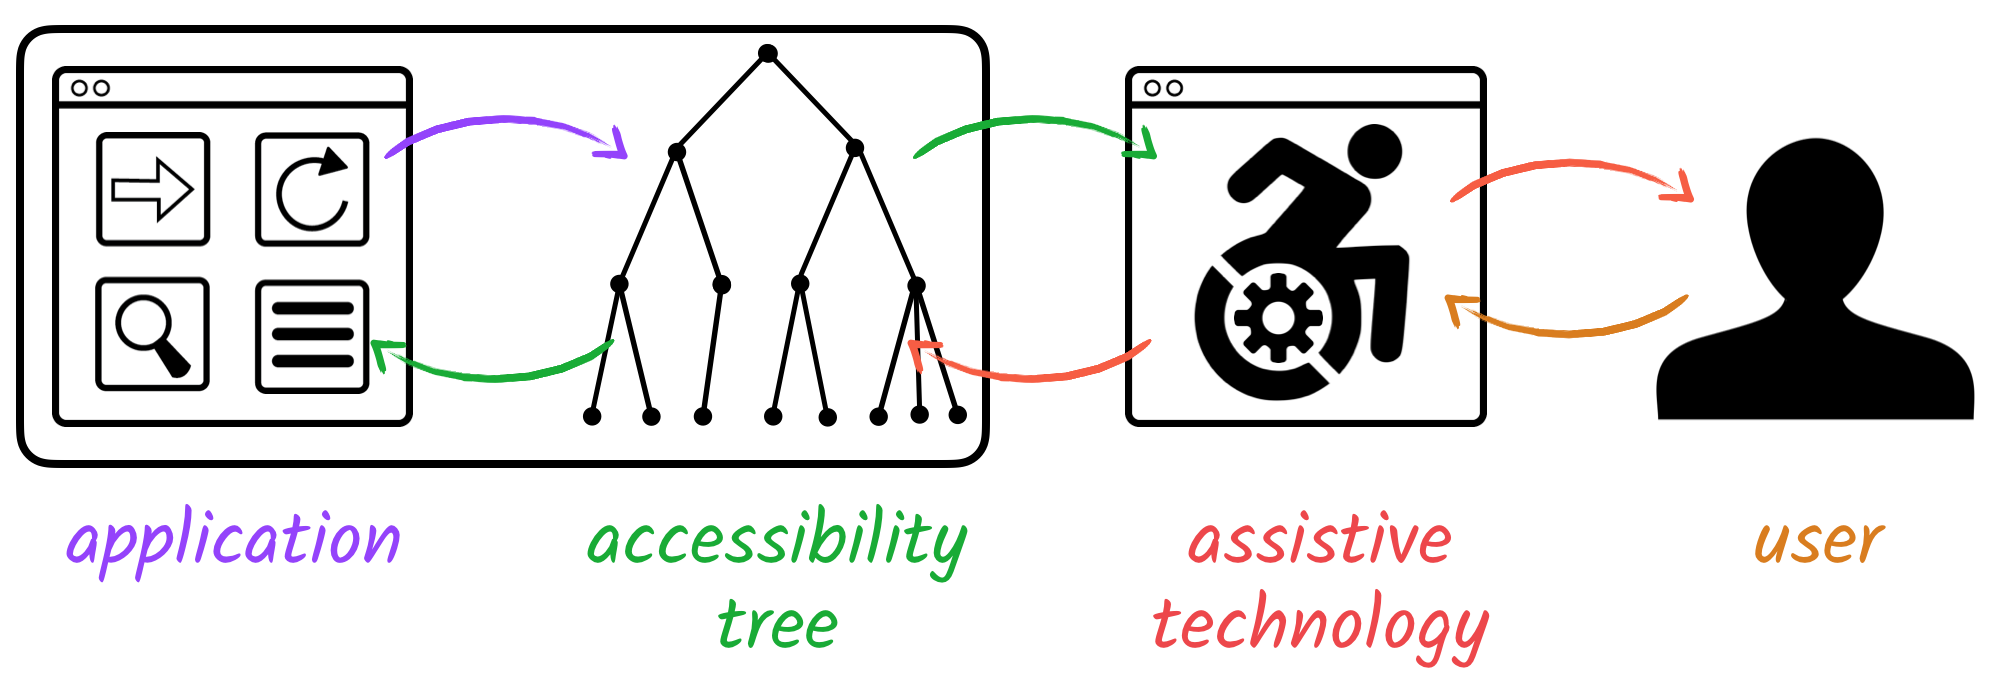 Flow from application UI to accessibility tree to assistive technology to user